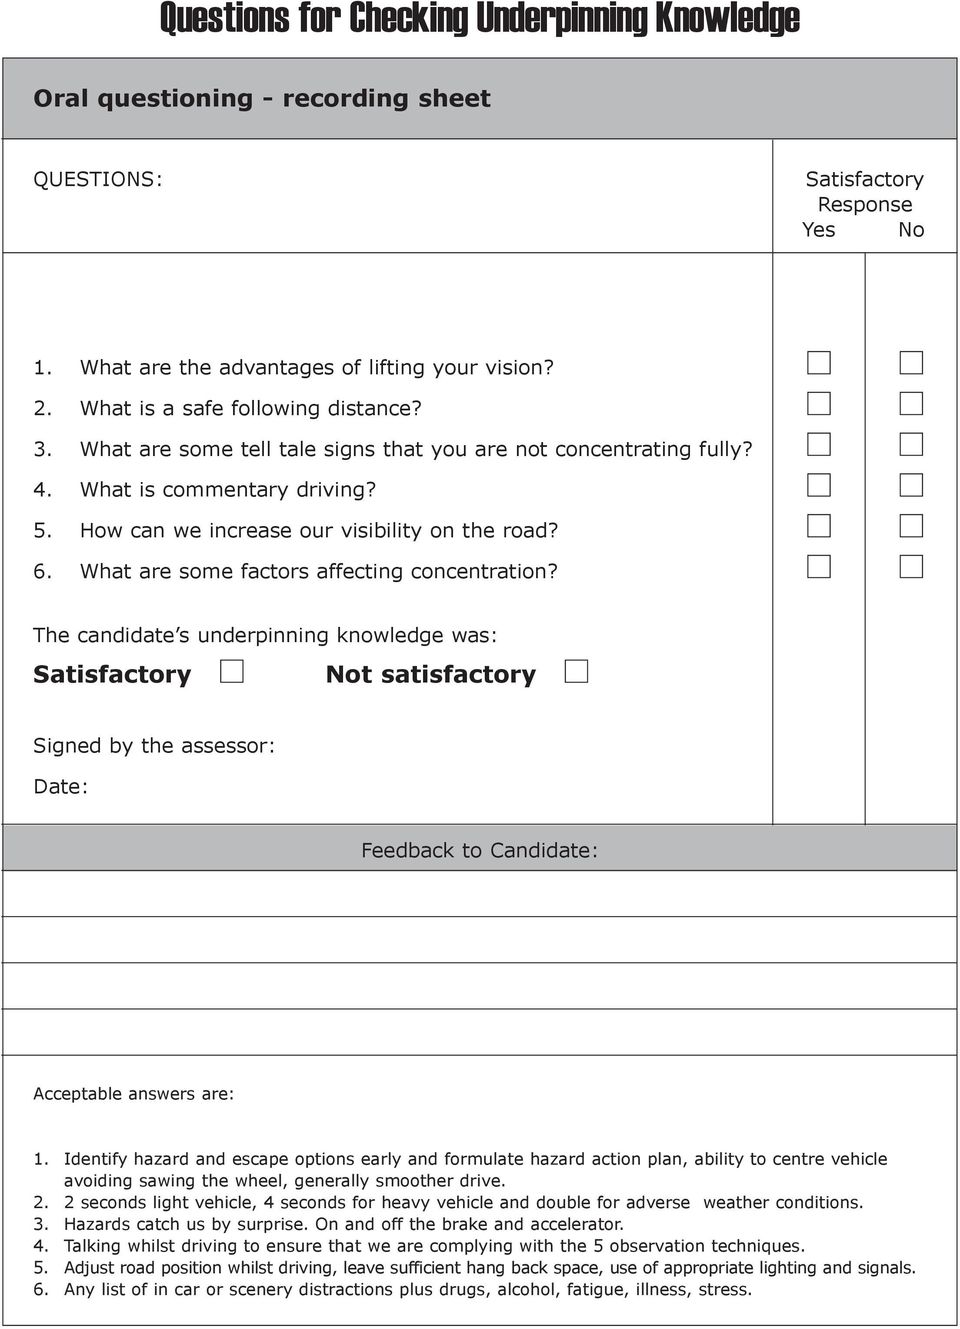 What are some factors affecting concentration? The candidate s underpinning knowledge was: Satisfactory Not satisfactory Signed by the assessor: Date: Feedback to Candidate: Acceptable answers are: 1.